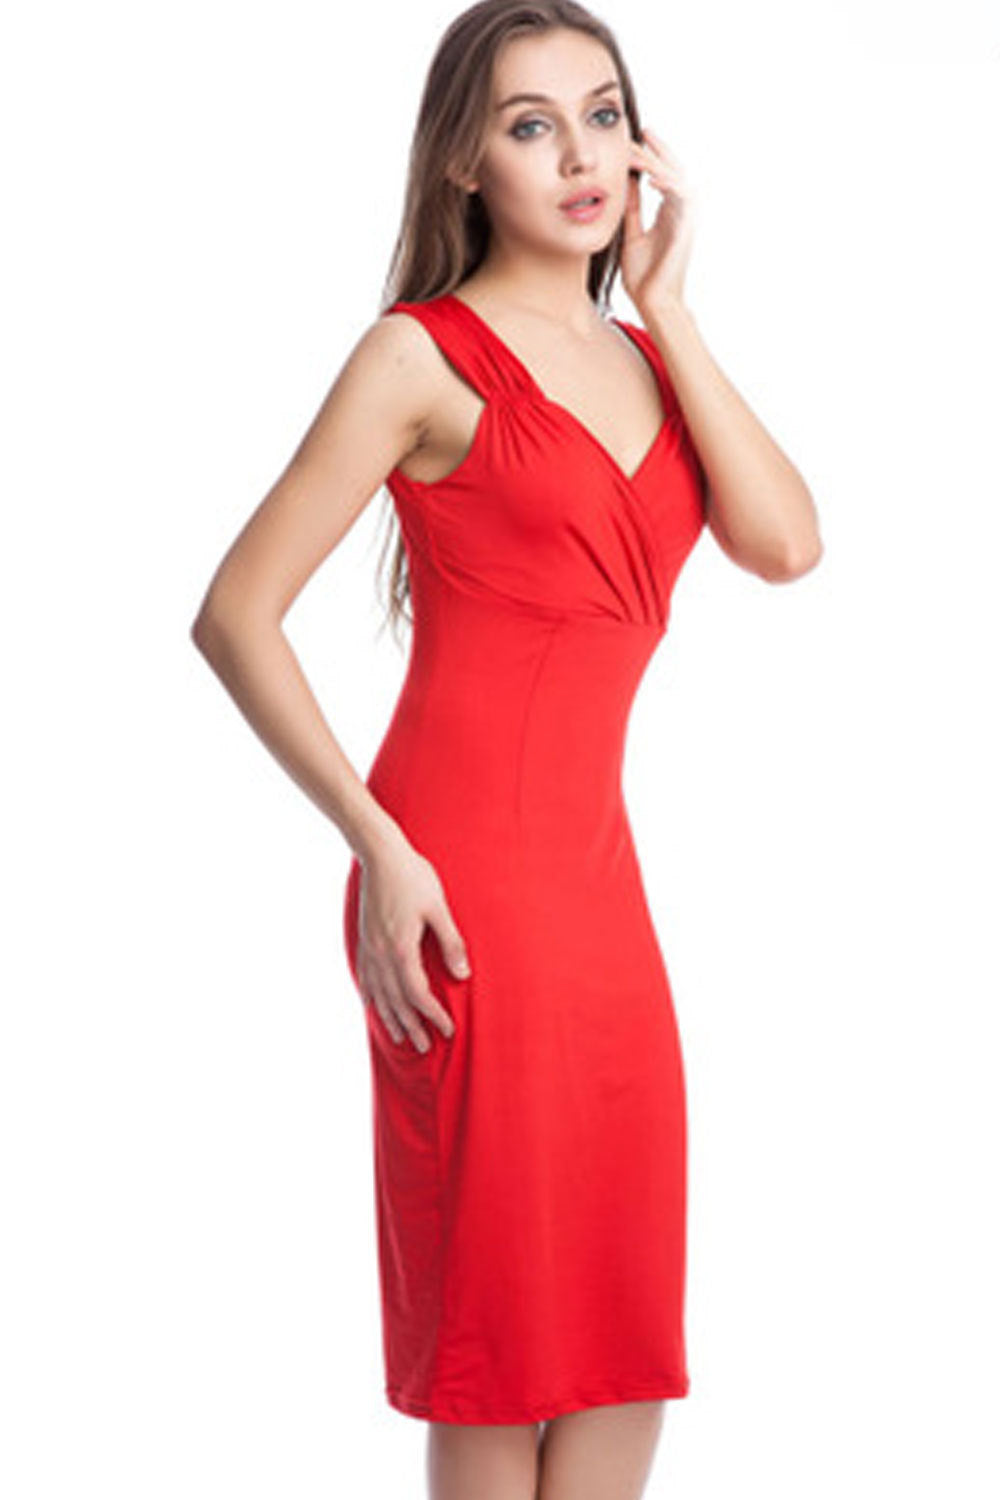 Ketty More Women Graceful Solid Color Sleeveless Cocktail Evening Dress-KMWD252